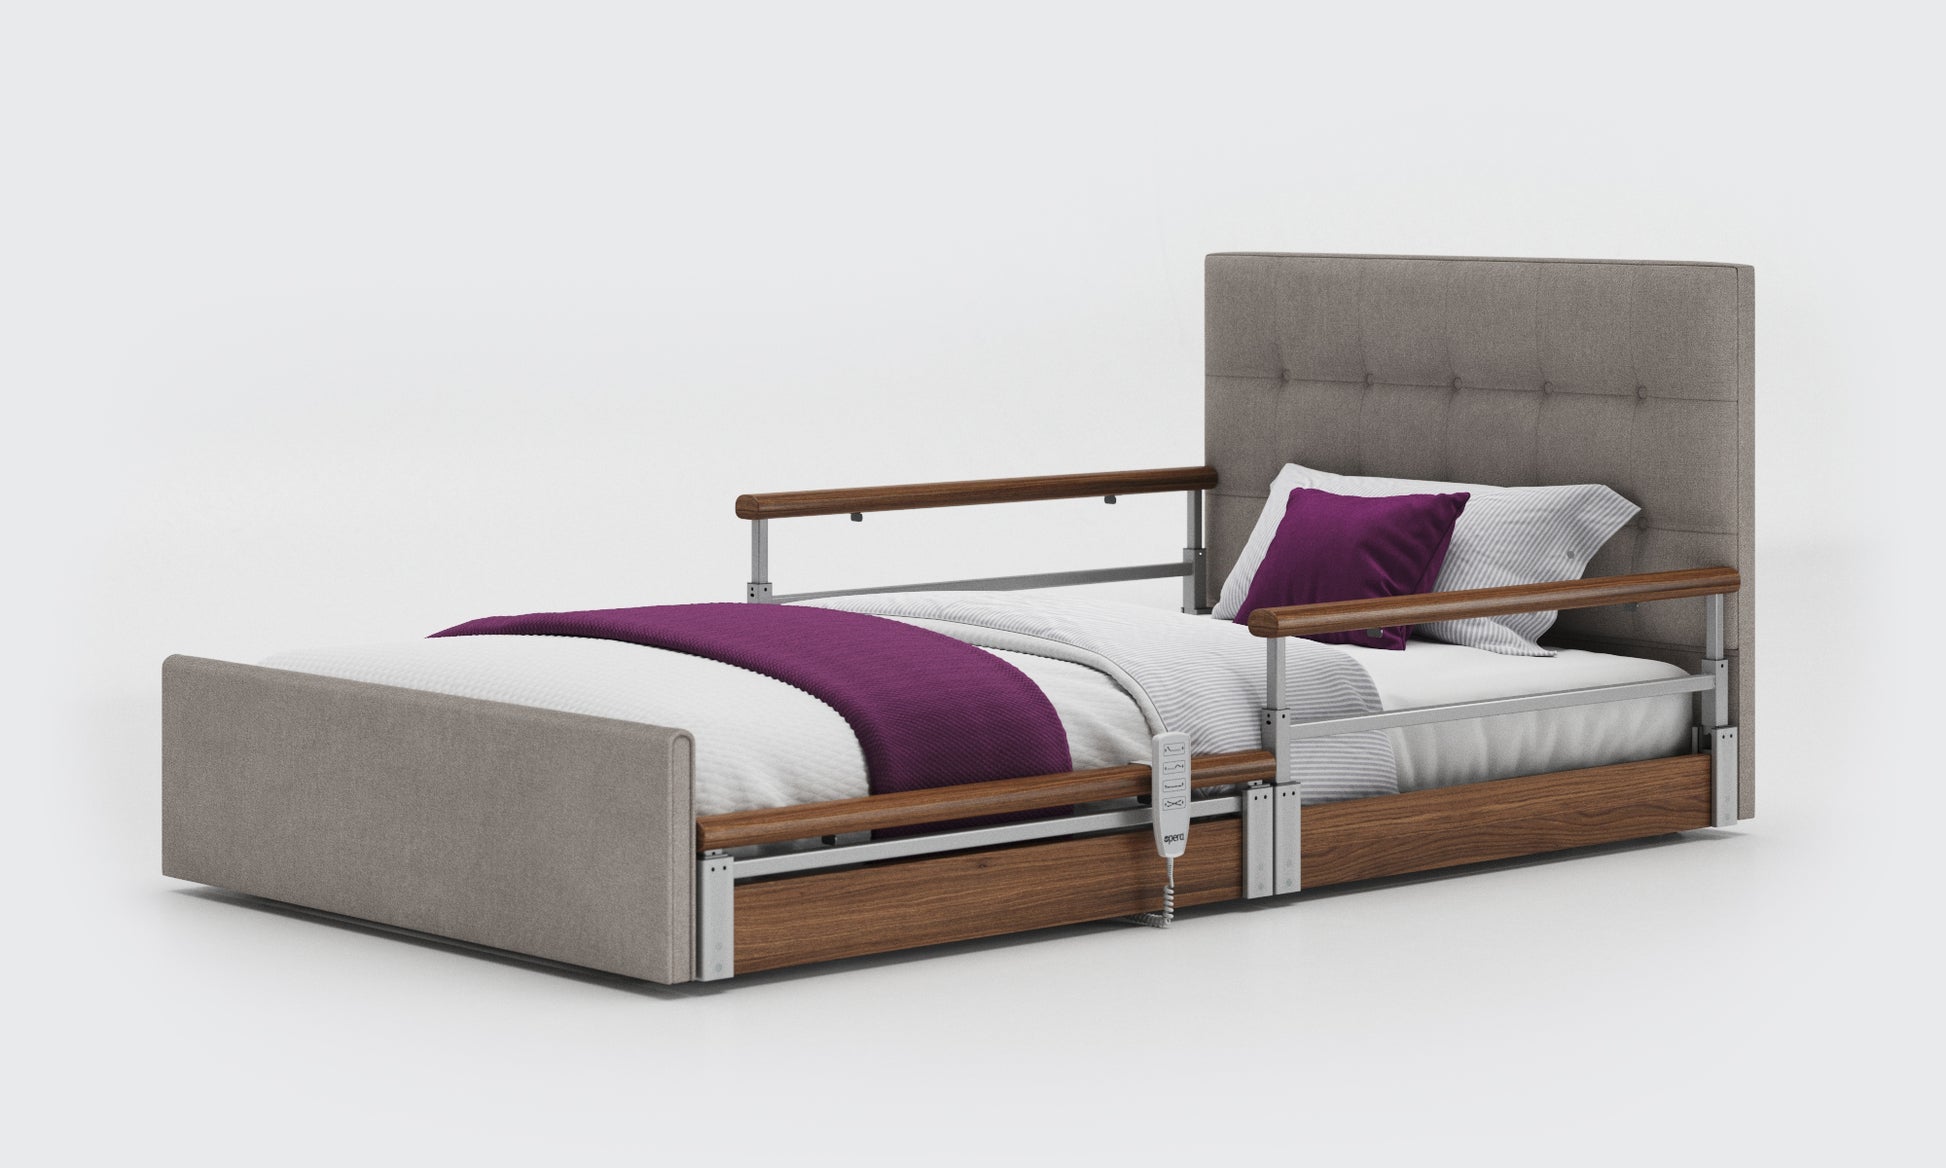 solo comfort plus bed in 3ft6 with walnut split rails with an emerald headboard in zinc fabric